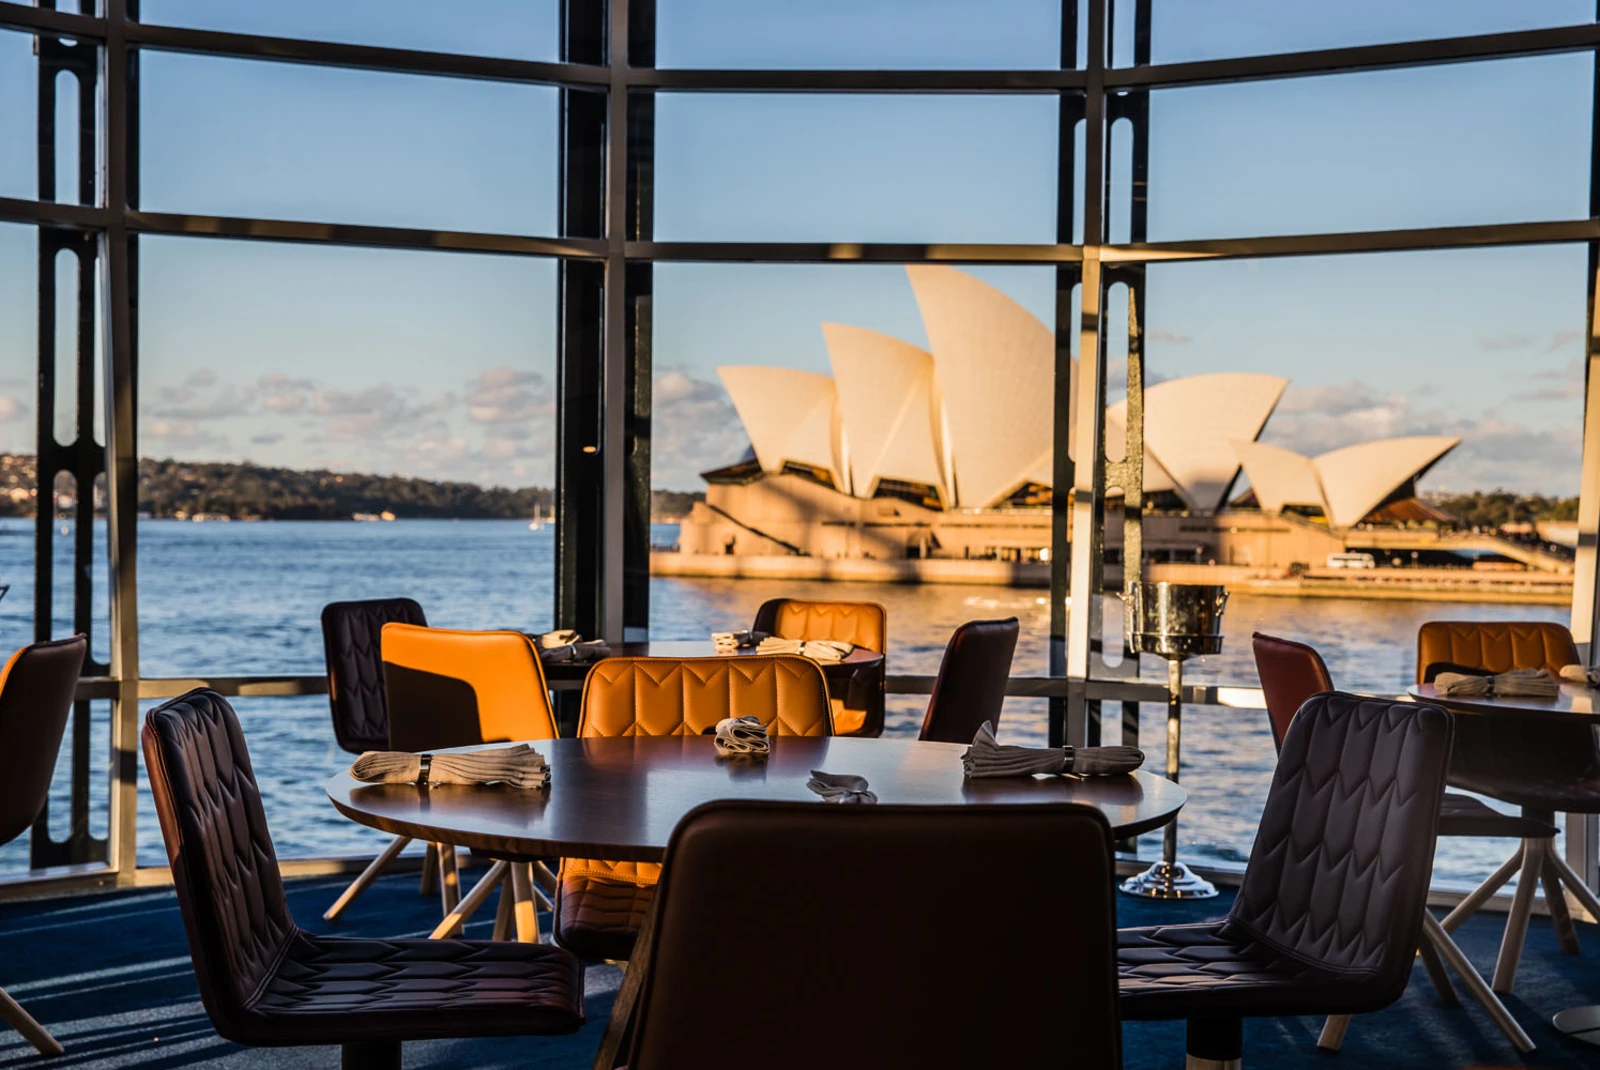 First Timer's Guide to Sydney Australia - Places to eat & drink